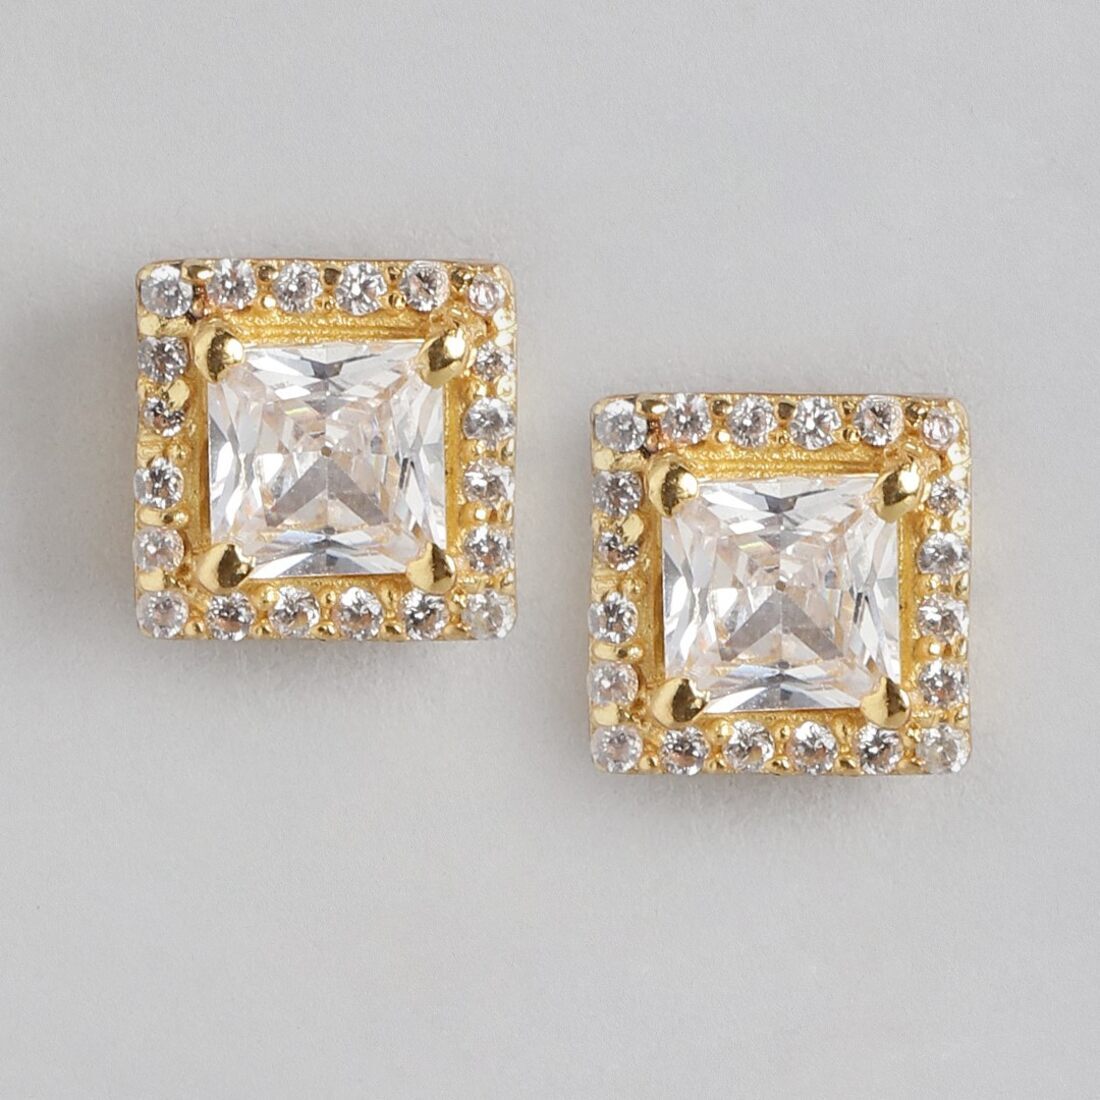 Golden Elegance 925 Sterling Silver Gold-Plated Square Stud Earrings